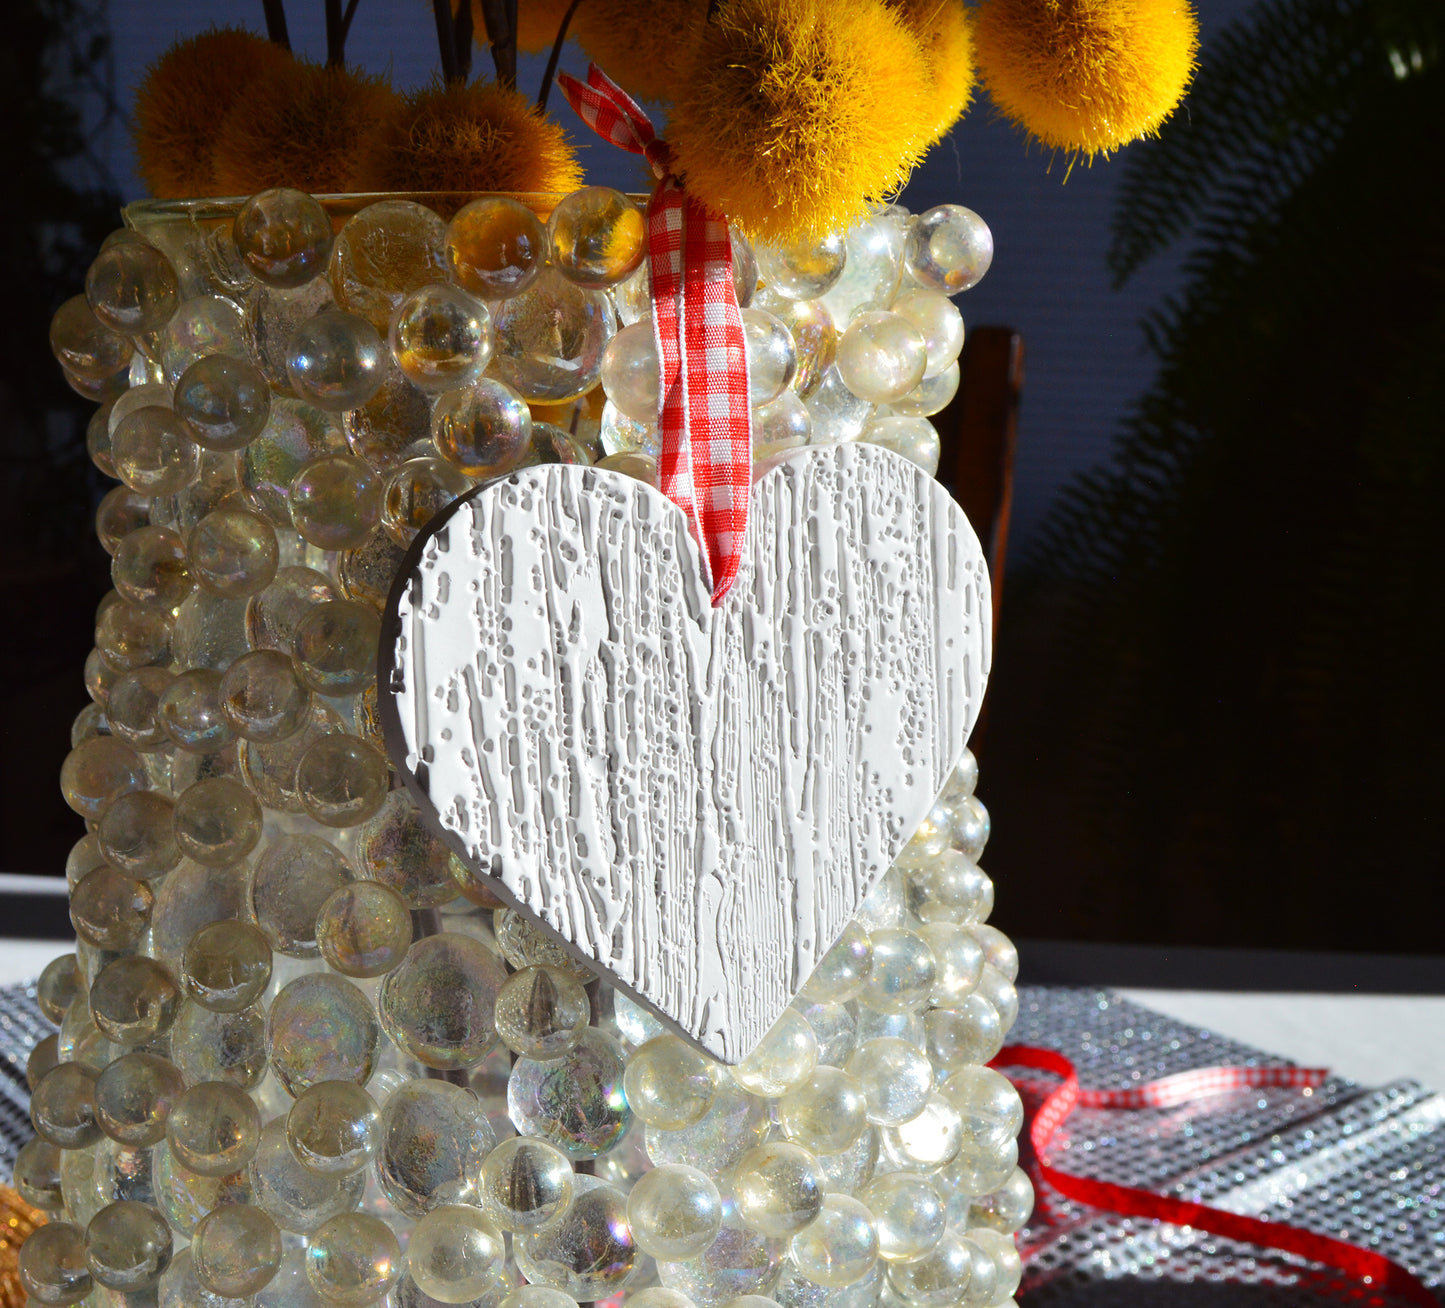 Valentine's Day ornaments - Set of 3 textured hearts